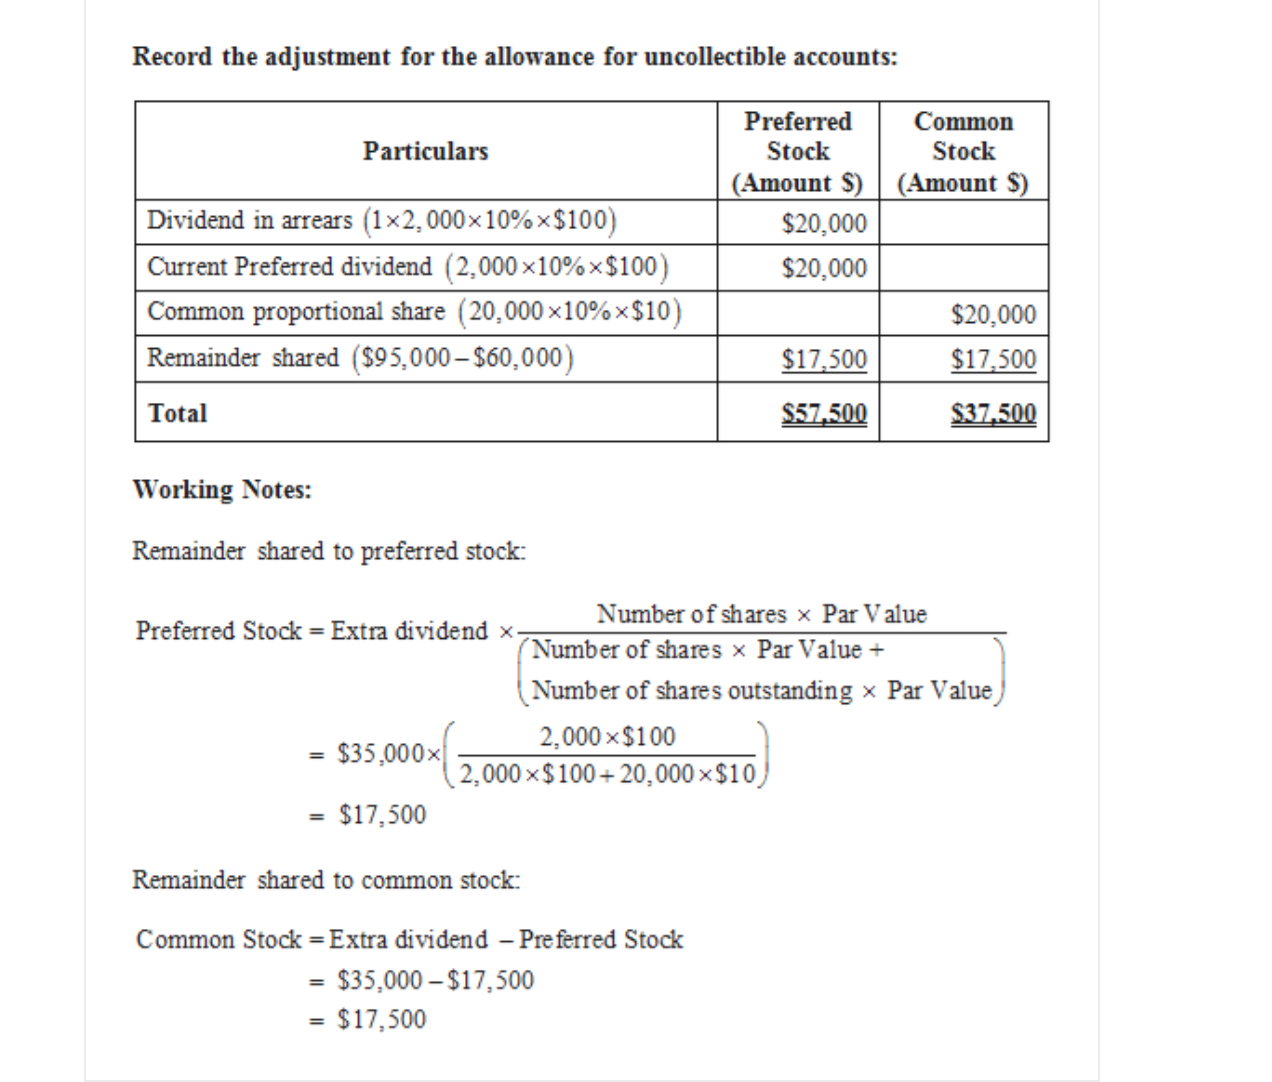 Record the adjustment for the allowance for uncollectible accounts:
Preferred
Common
Particulars
Stock
Stock
(Amount S)(Amount $)
Dividend in arrears (1x2,000x 10% x$100)
Current Preferred dividend (2,000 x10% x$100)
Common proportional share (20,000x10% x$ 10)
Remainder shared (S95,000-$60,000)
$20,000
$20,000
$20,000
$17,500
$17,500
$57,500
Total
$37,500
Working Notes:
Remainder shared to preferred stock
Number of shares x Par Value
Preferred Stock Extra dividend x-
(Number of shares x Par Value+
Number of shares outstanding x Par Value
2,000 x$100
$35,000x
2,000 x$100+20,000 x $10
$17,500
Remainder shared to common stock
Common Stock = Extra dividend - Preferred Stock
$35,000-$17,500
$17,500
